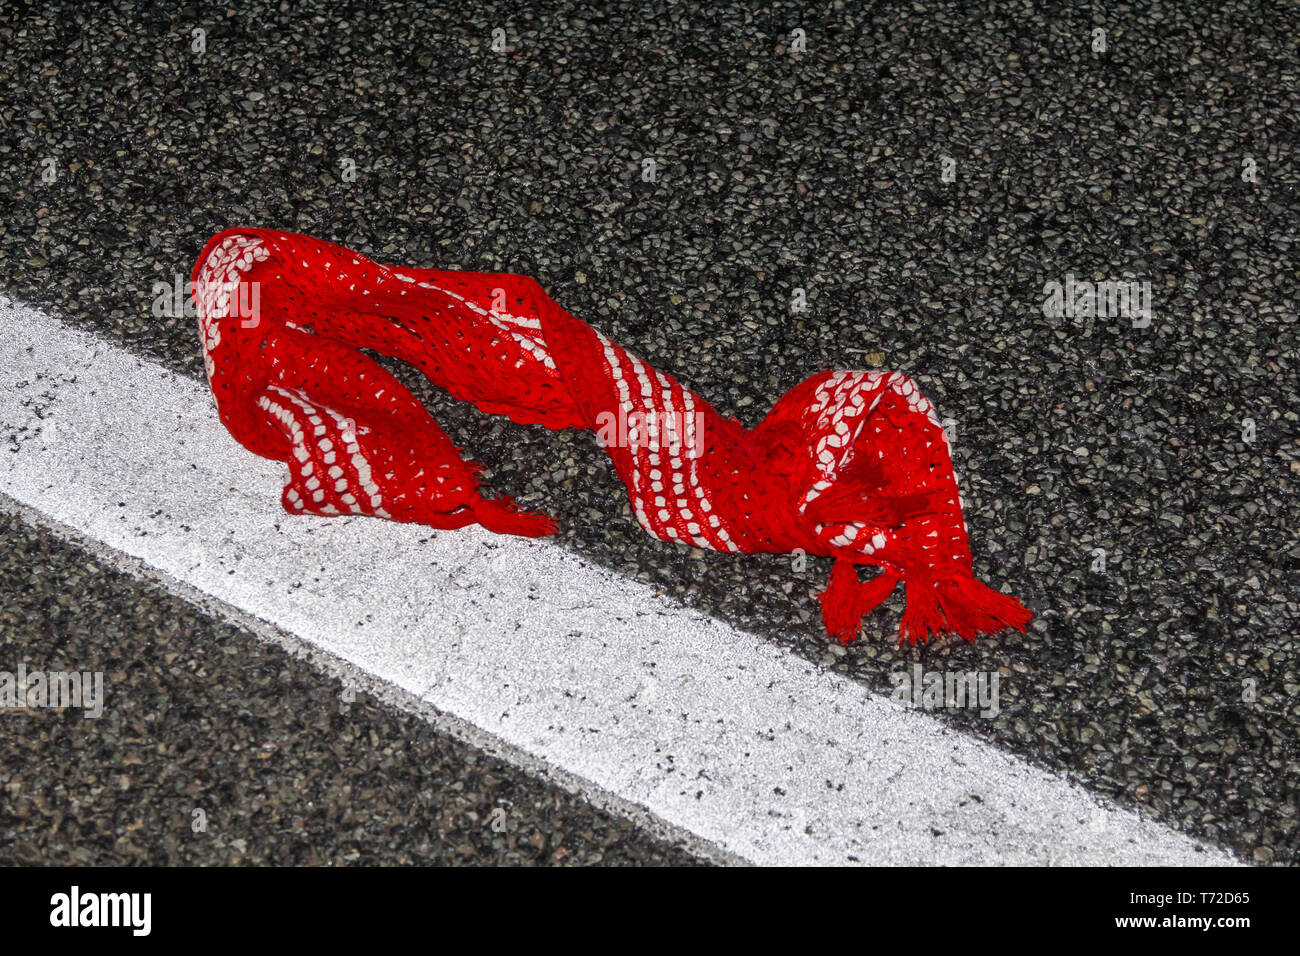 red scarf lying on a wet asphalt road at night Stock Photo